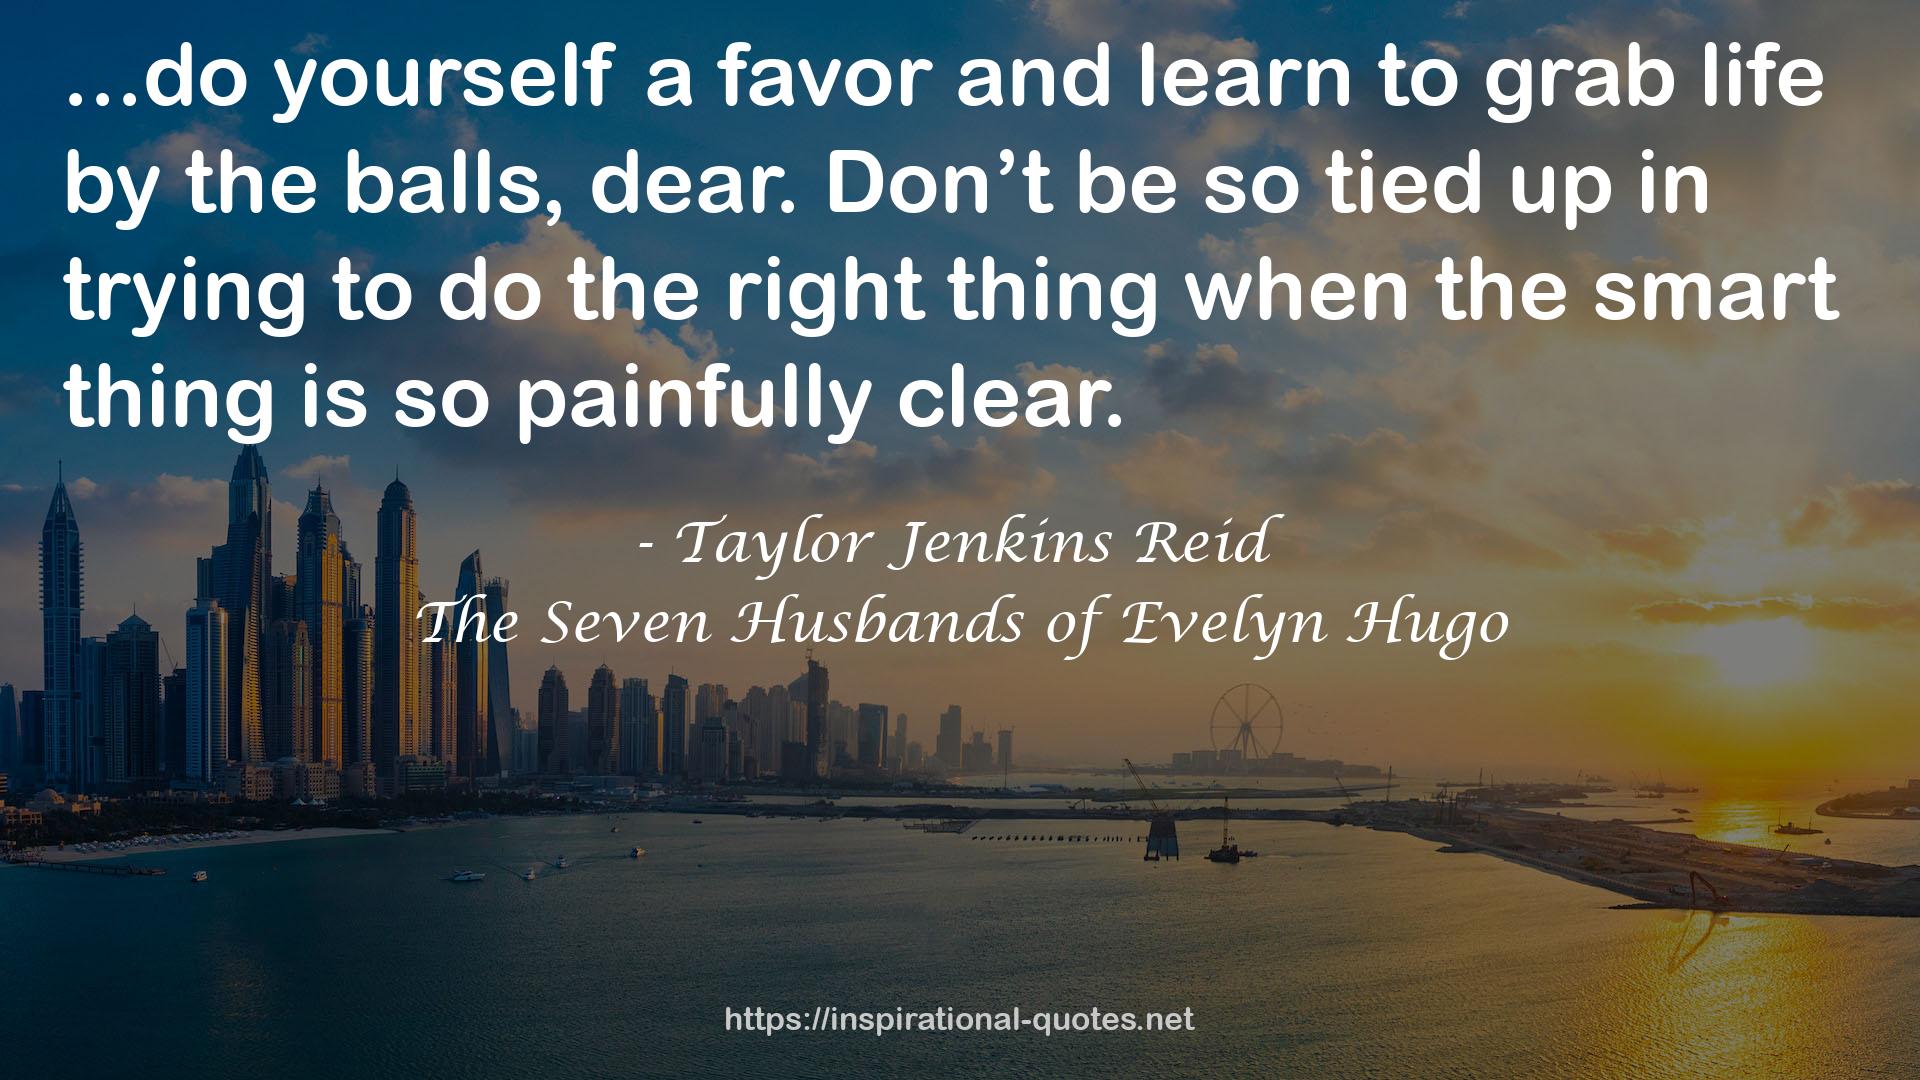 The Seven Husbands of Evelyn Hugo QUOTES